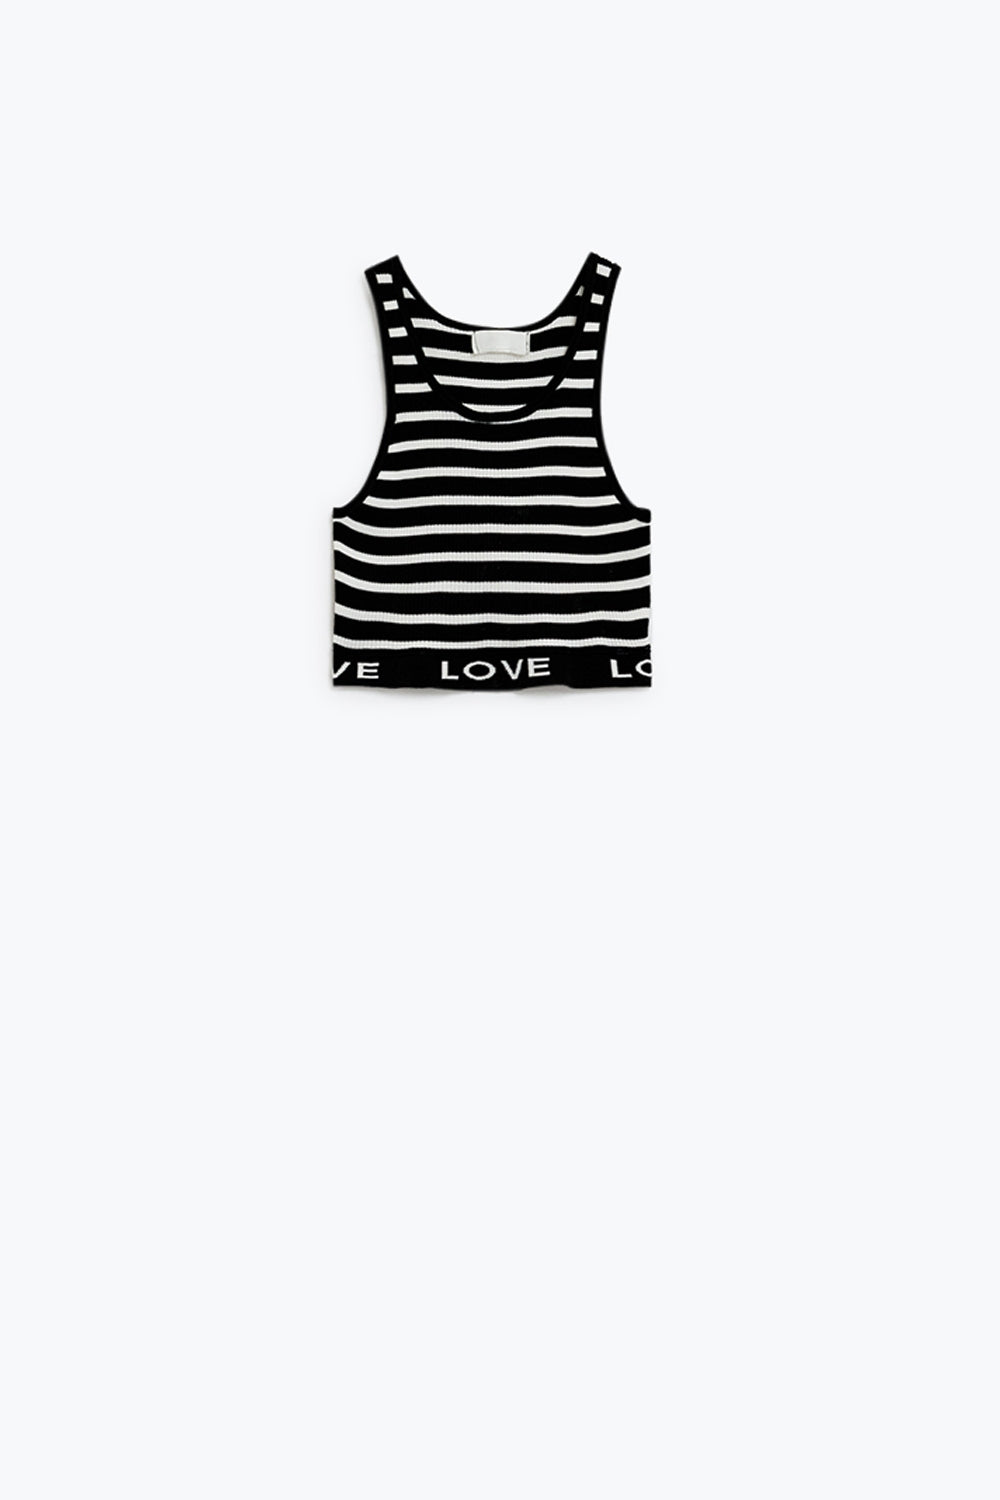 Q2 Striped Cropped Top with Love Text in black